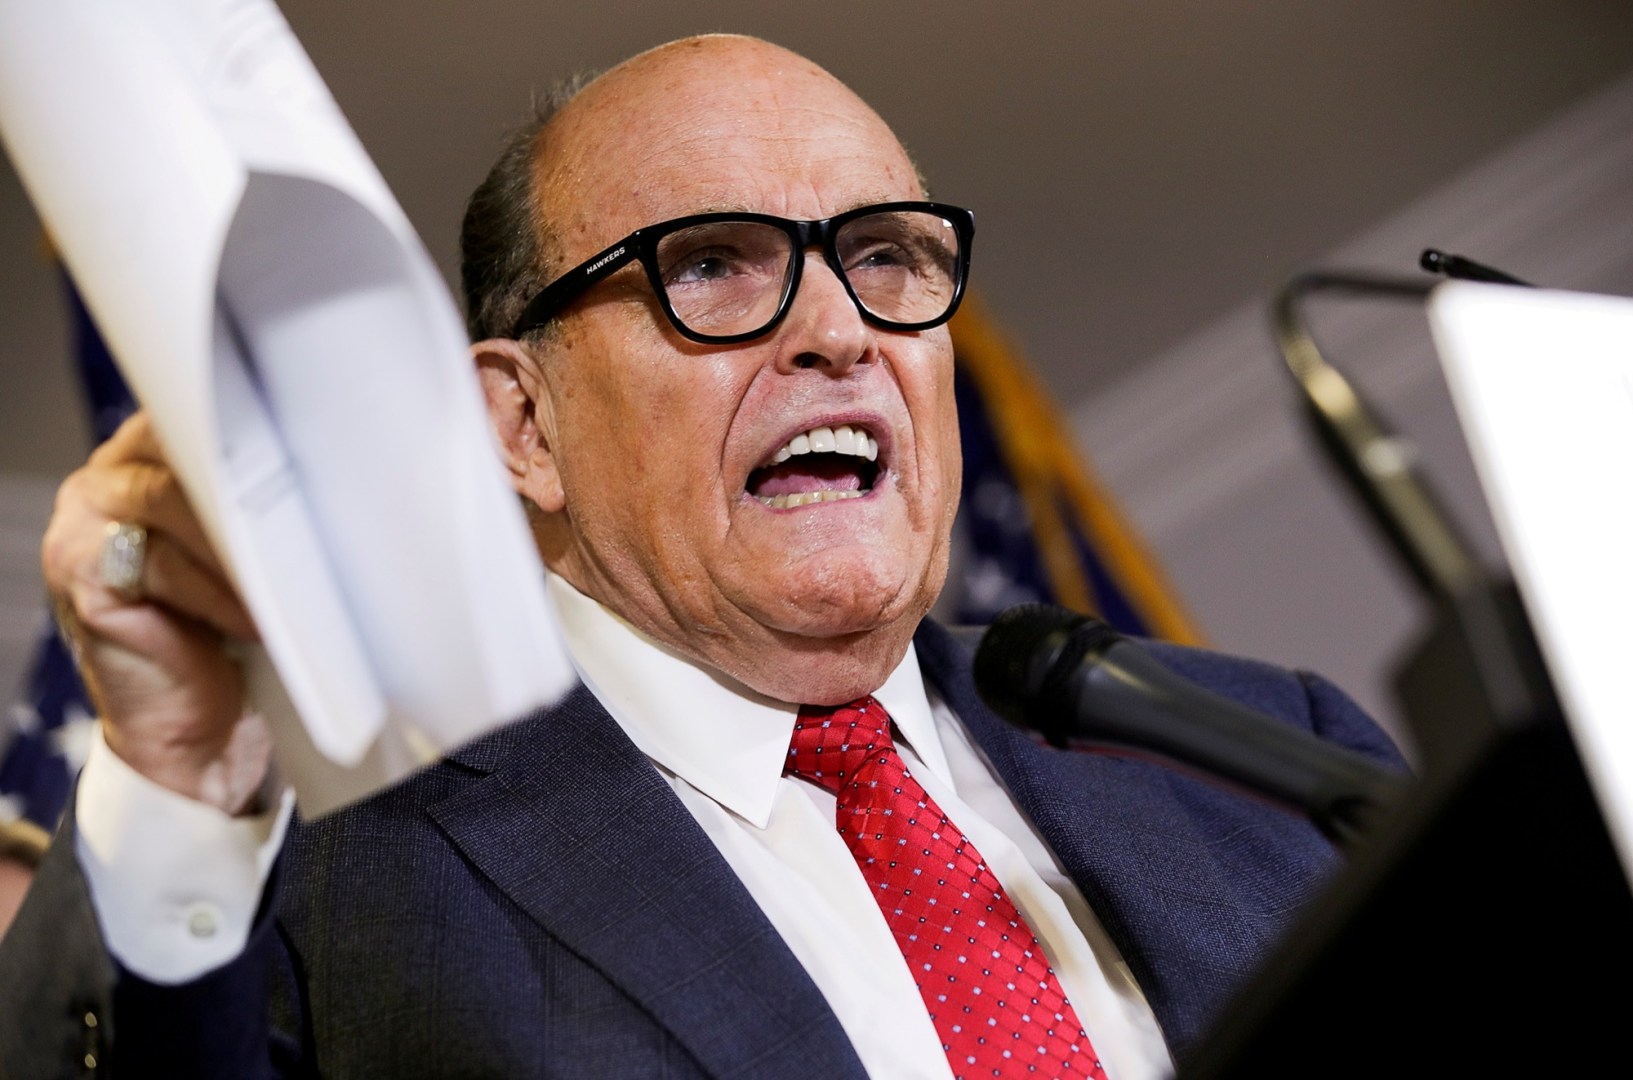 Rudy Giuliani will not testify in his defamation trial over spreading conspiracy theories about two Georgia election workers.